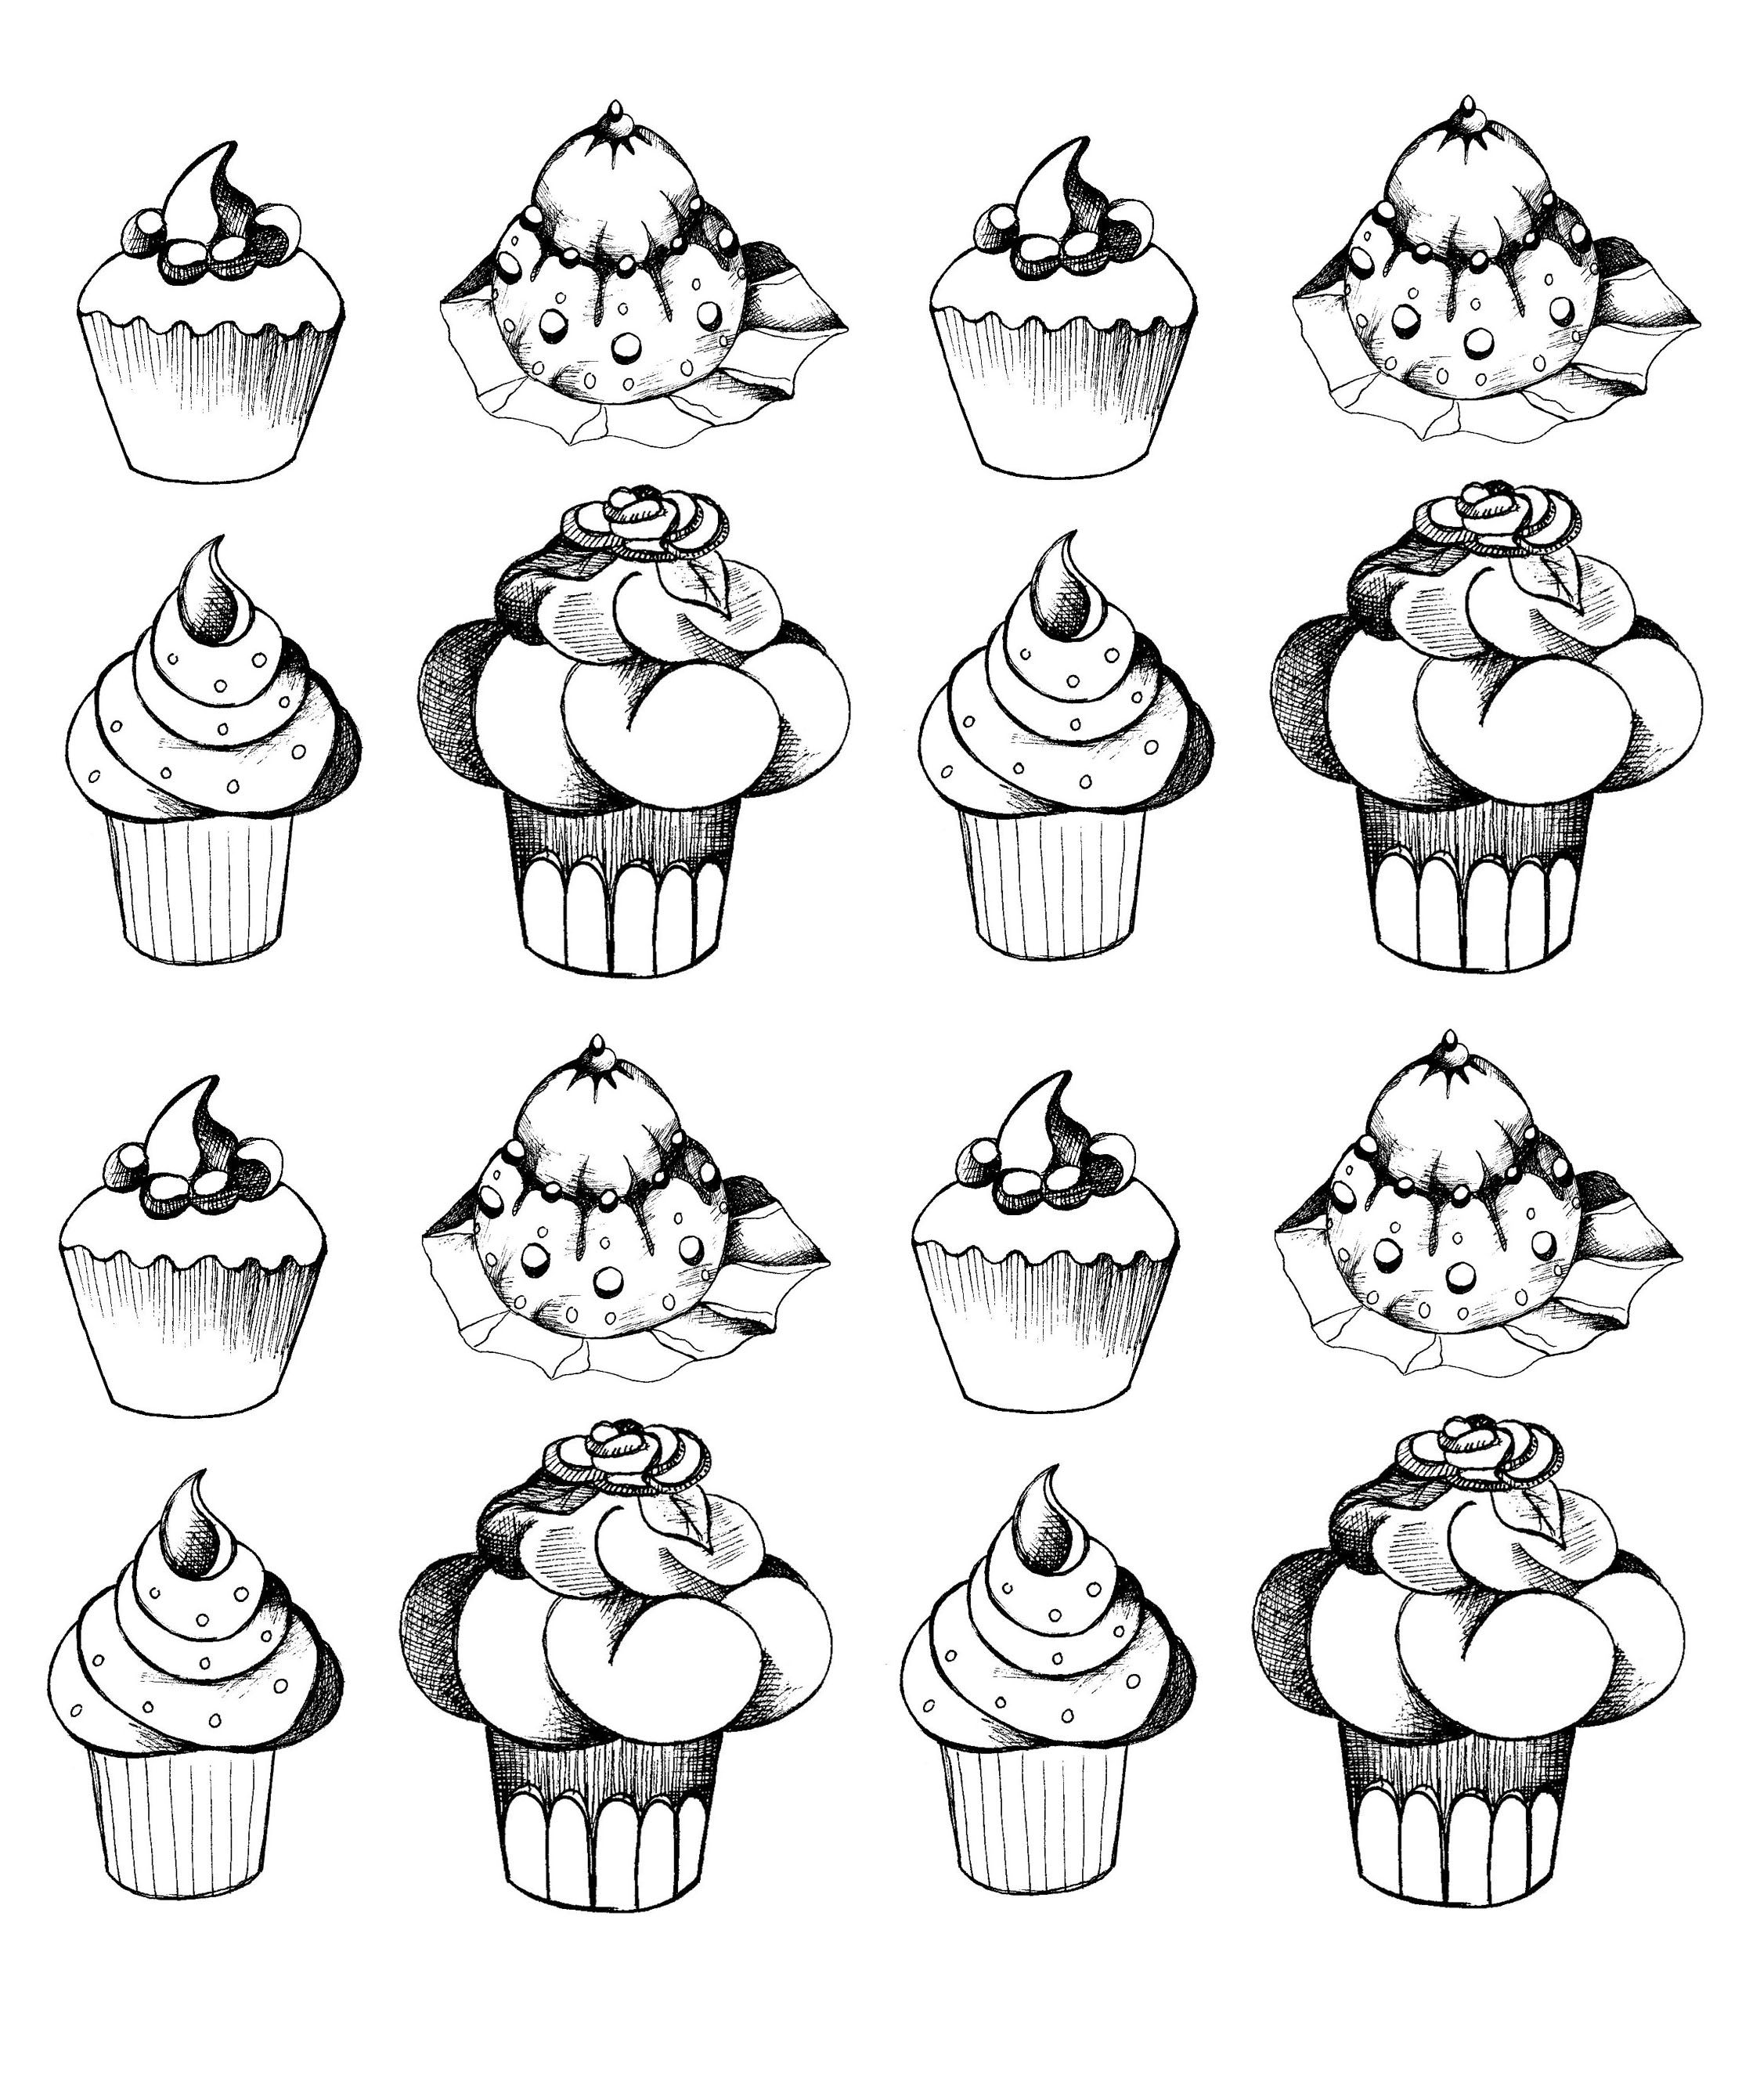 Cup Cake - Coloring Pages for adults : coloring-adult-cupcakes ...